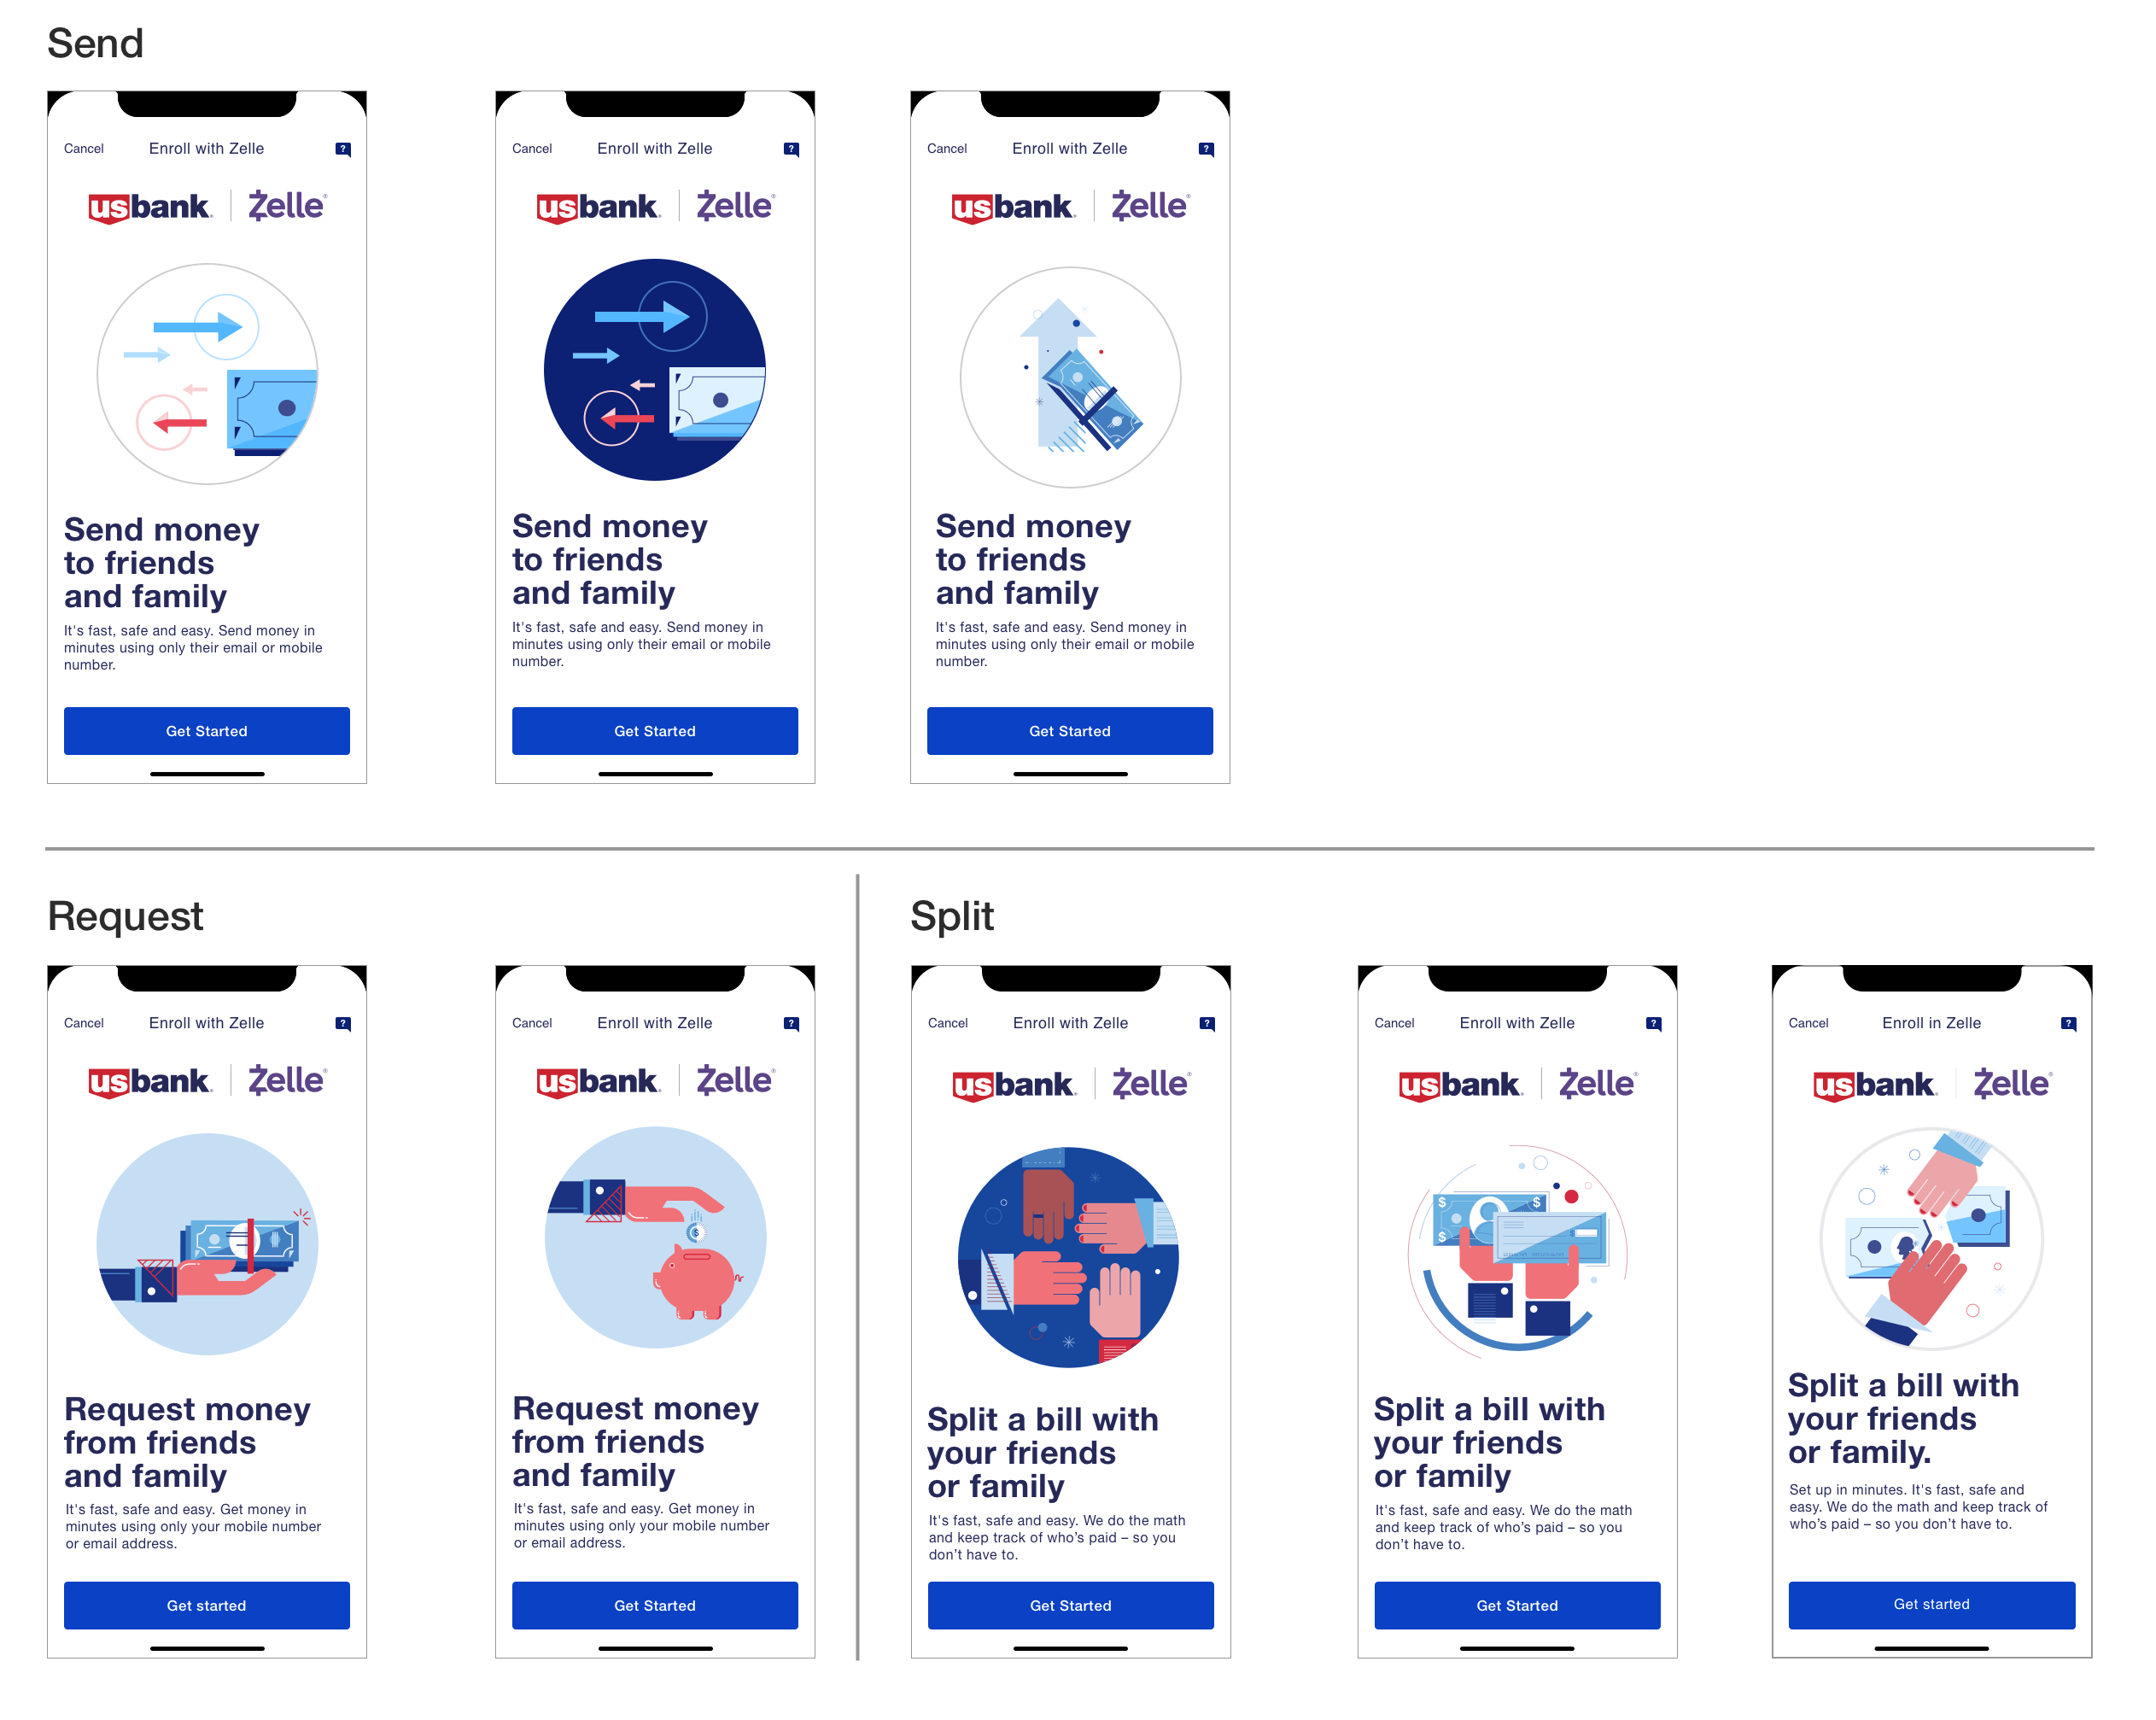 Second Round of Mockups in Illustration Style